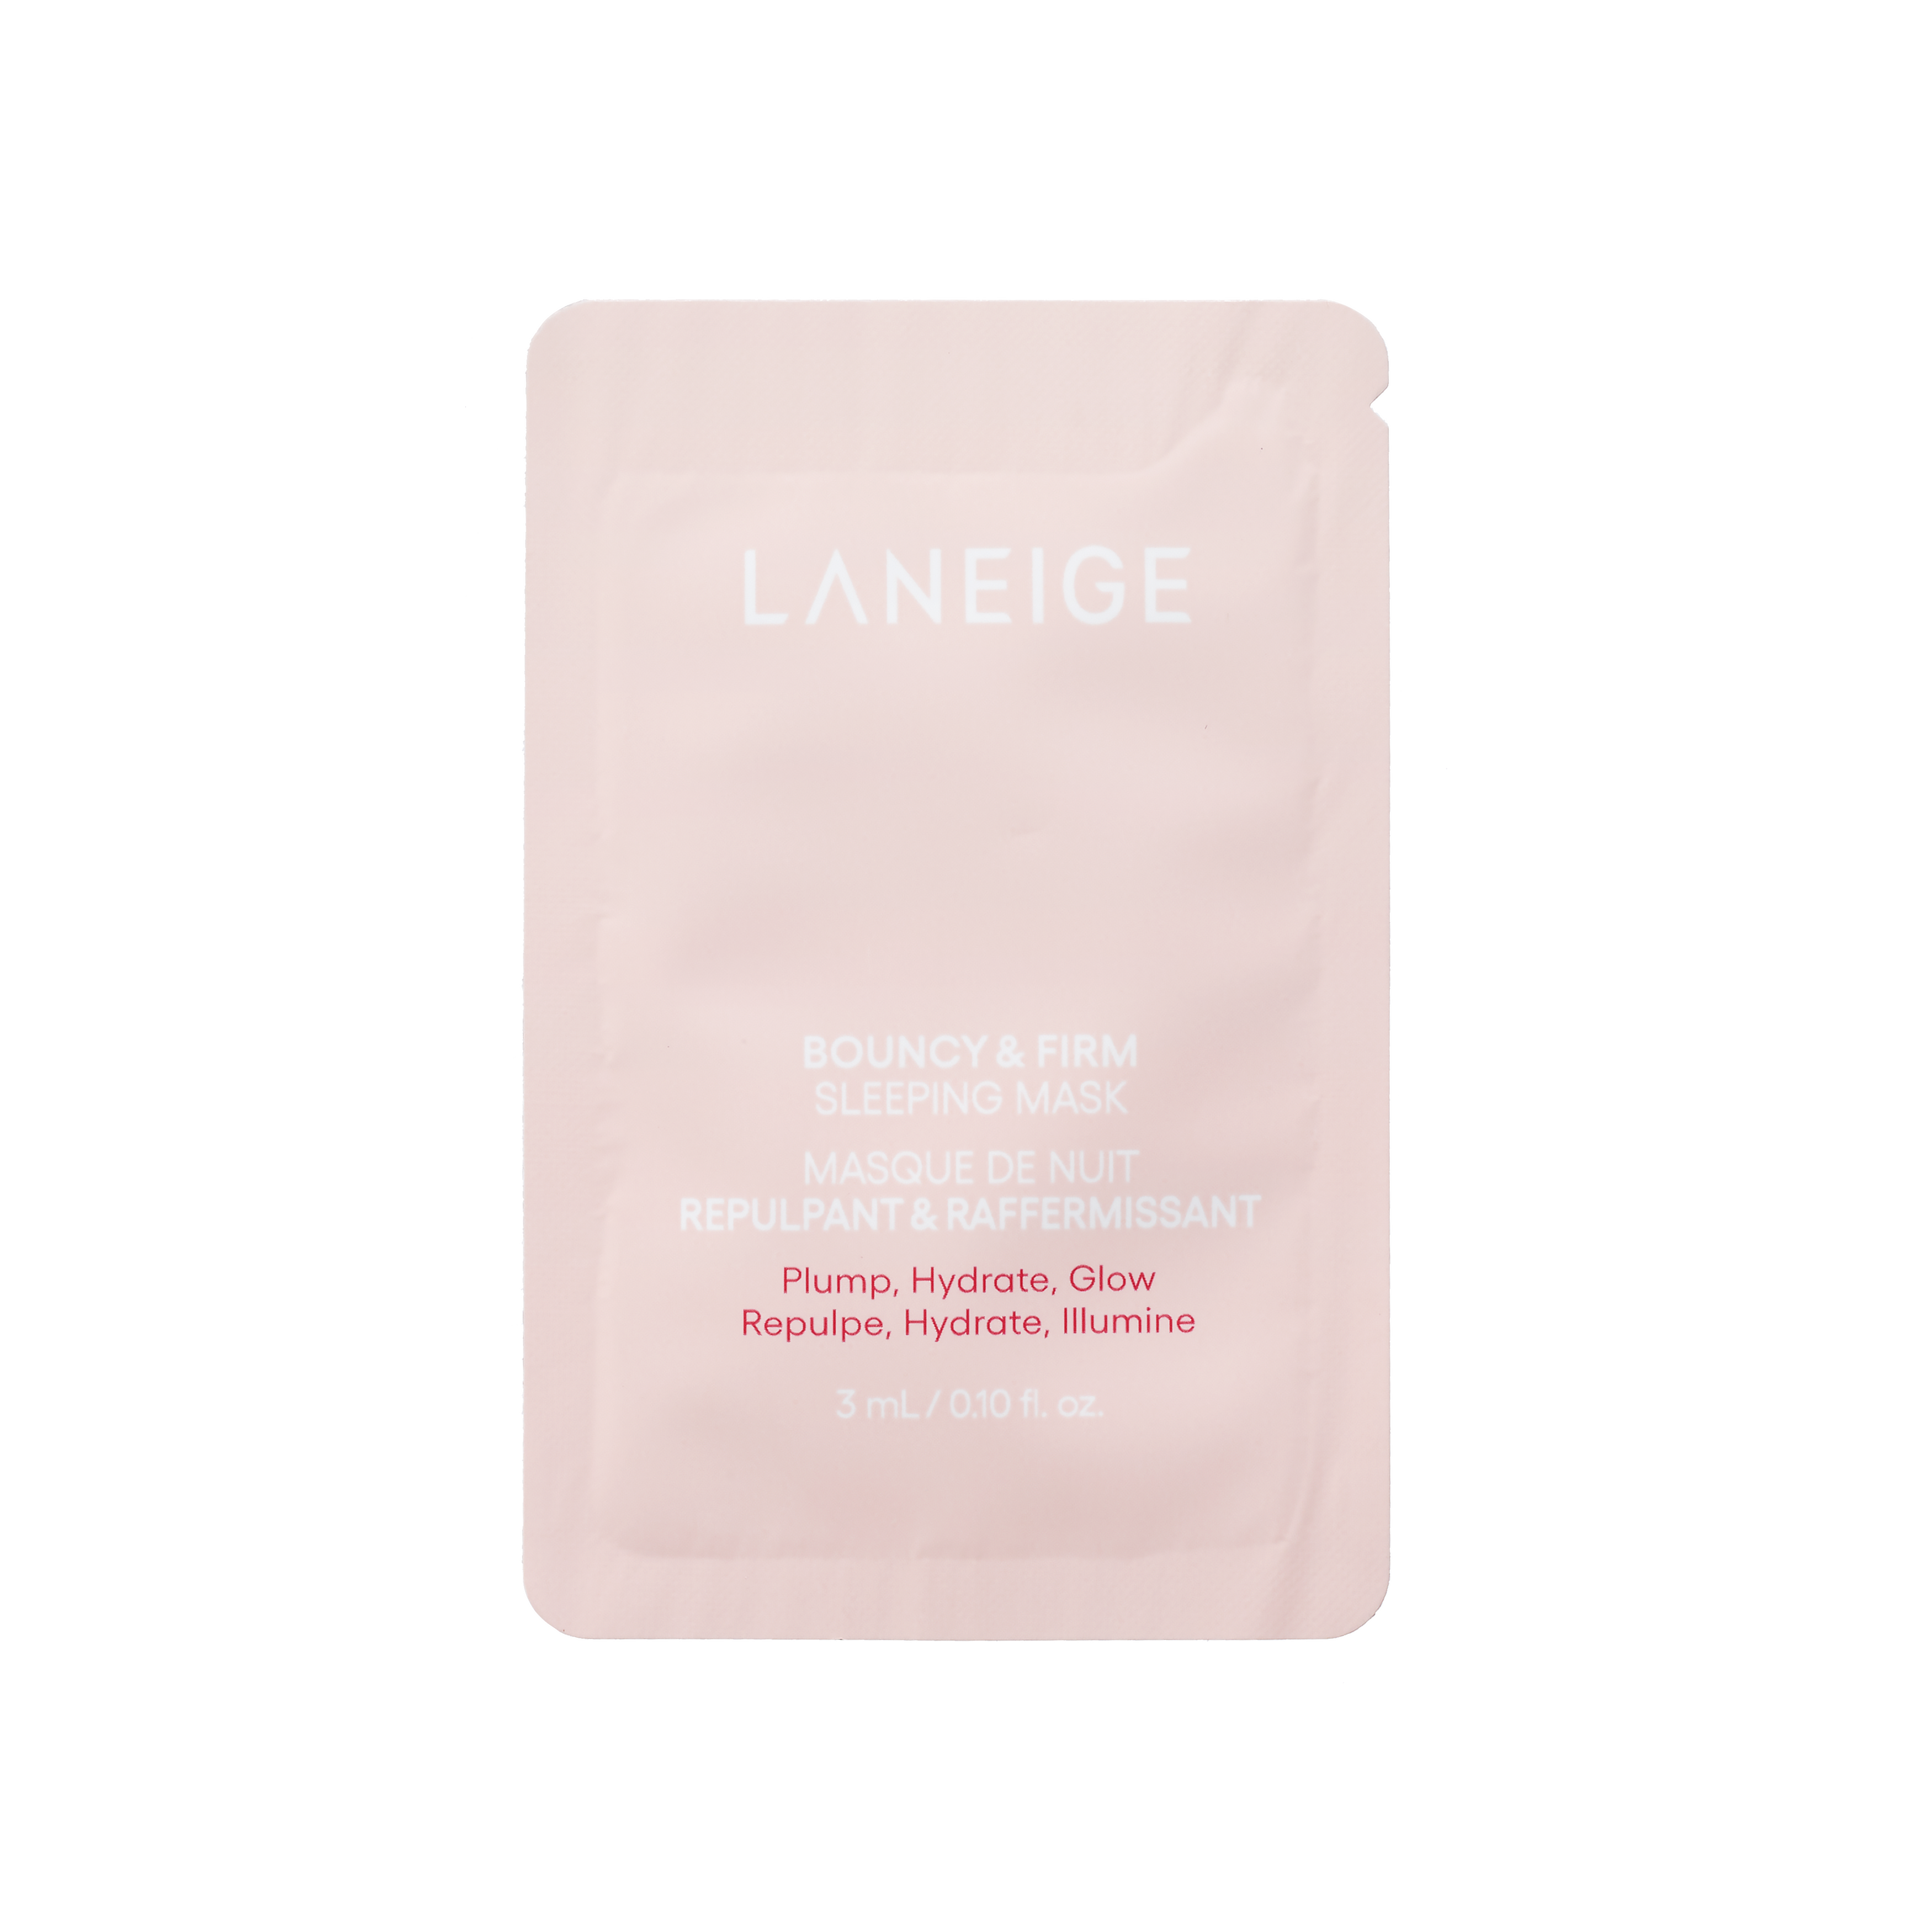 Laneige Bouncy & Firm Sleeping Mask 3ml (Only For Live)